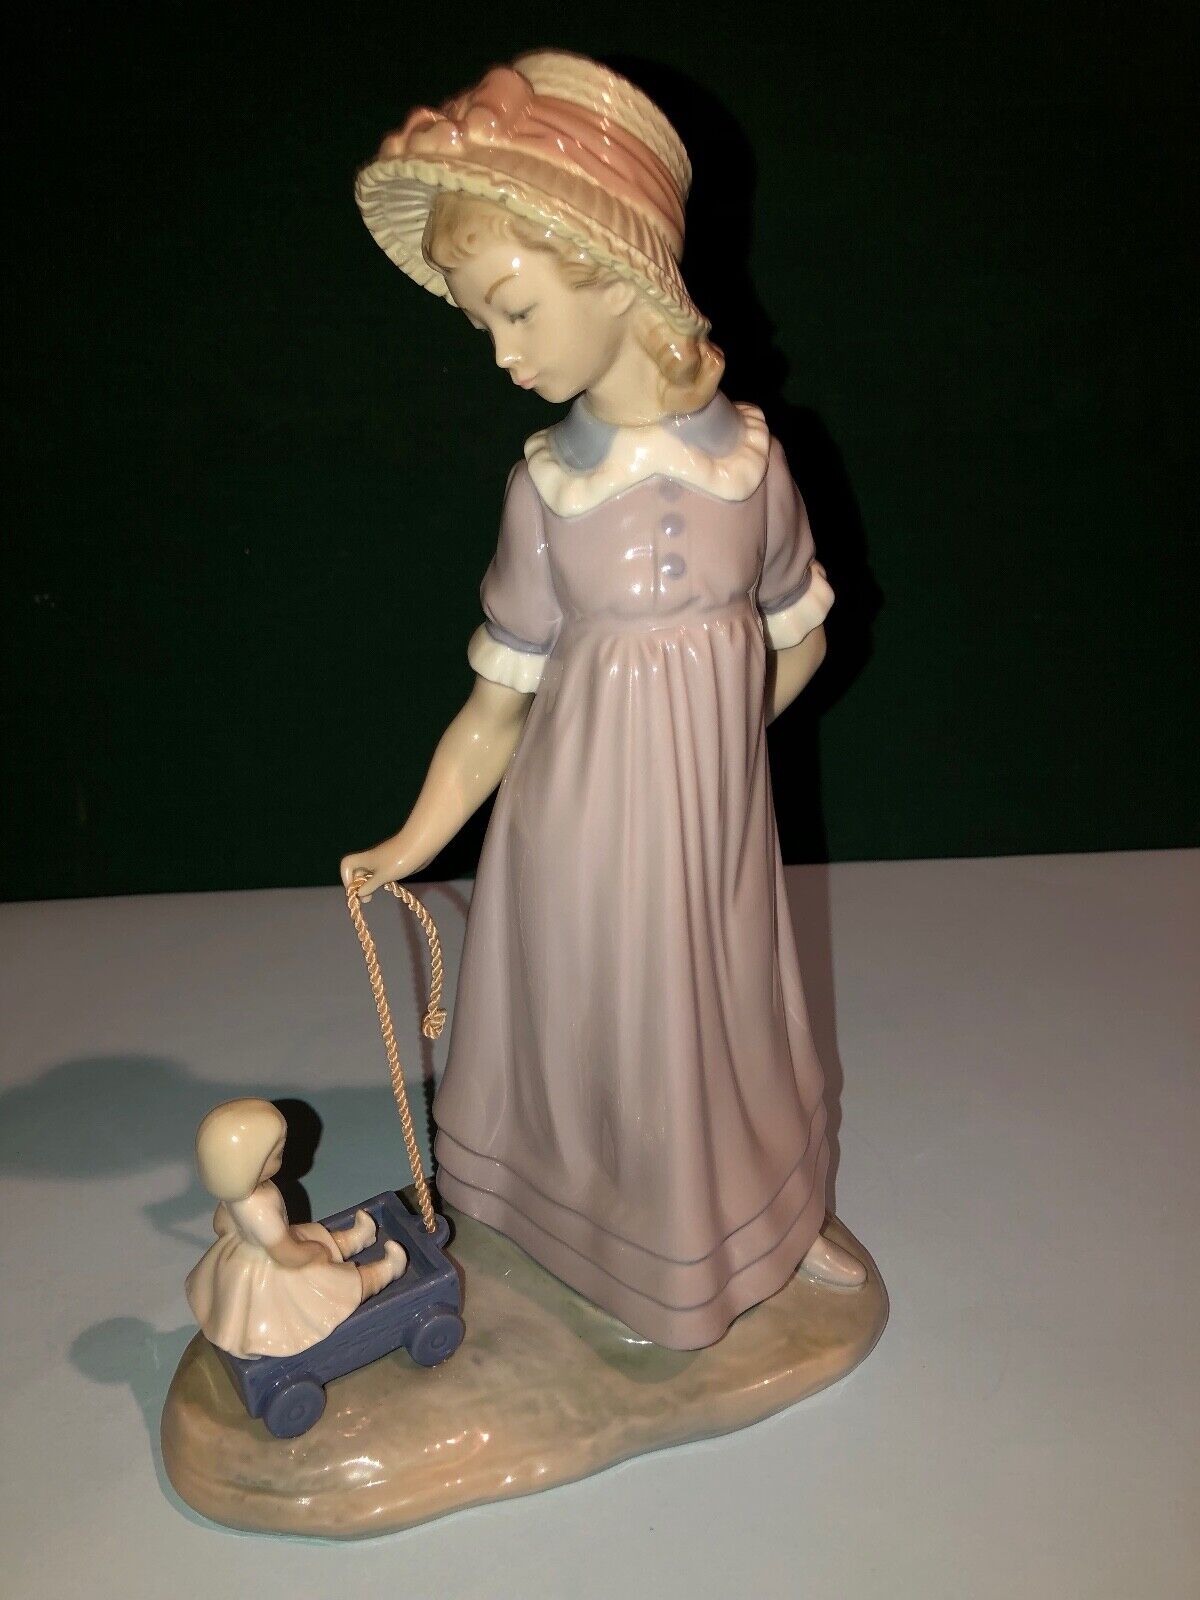 Lladro Girl pulling toy wagon with doll inside, # 5044 Girl Figurine